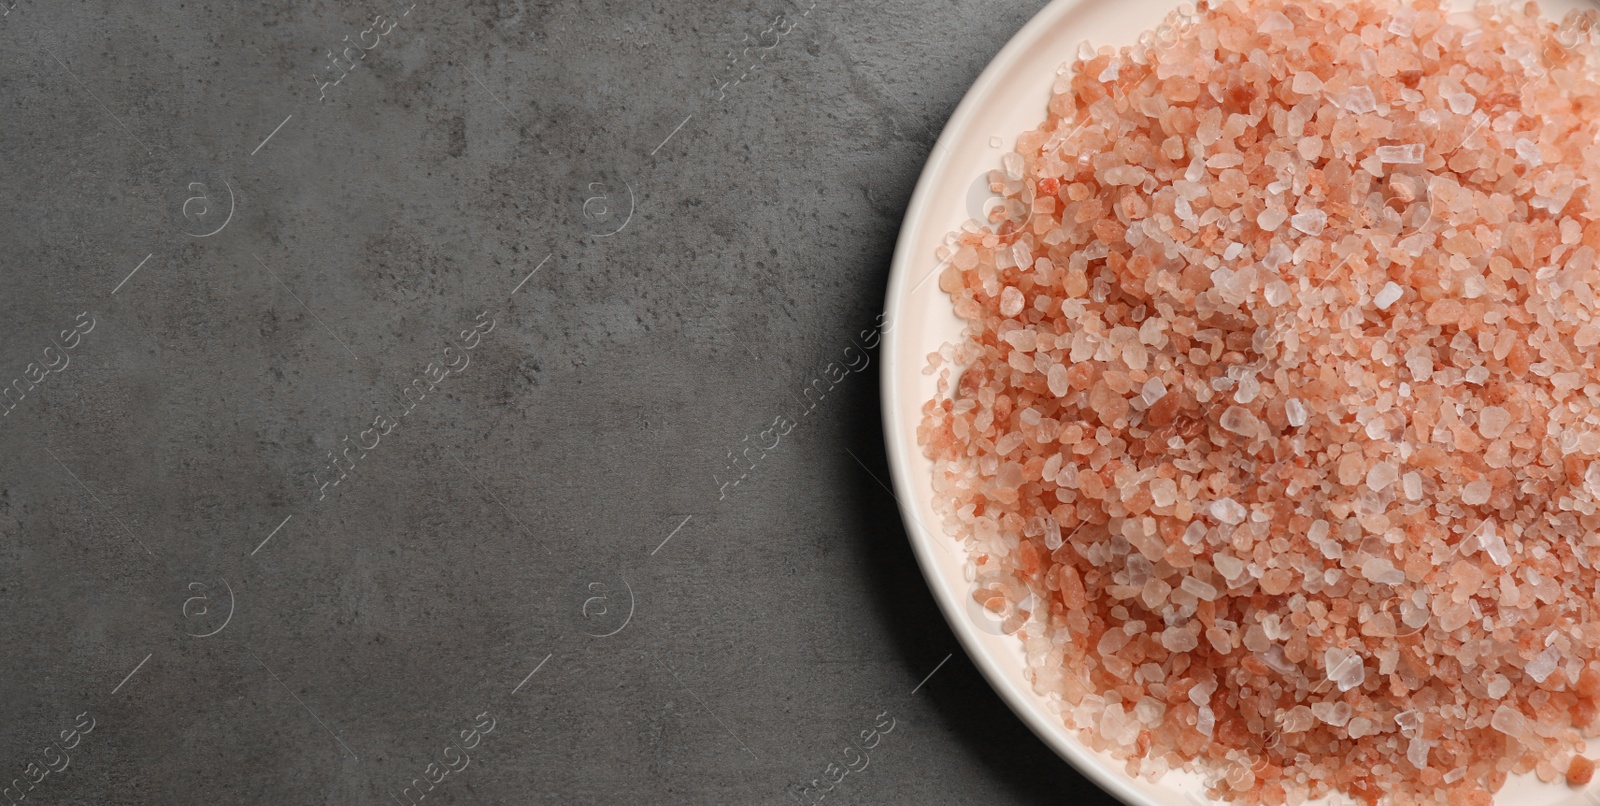 Photo of Pink himalayan salt on grey table, top view. Space for text